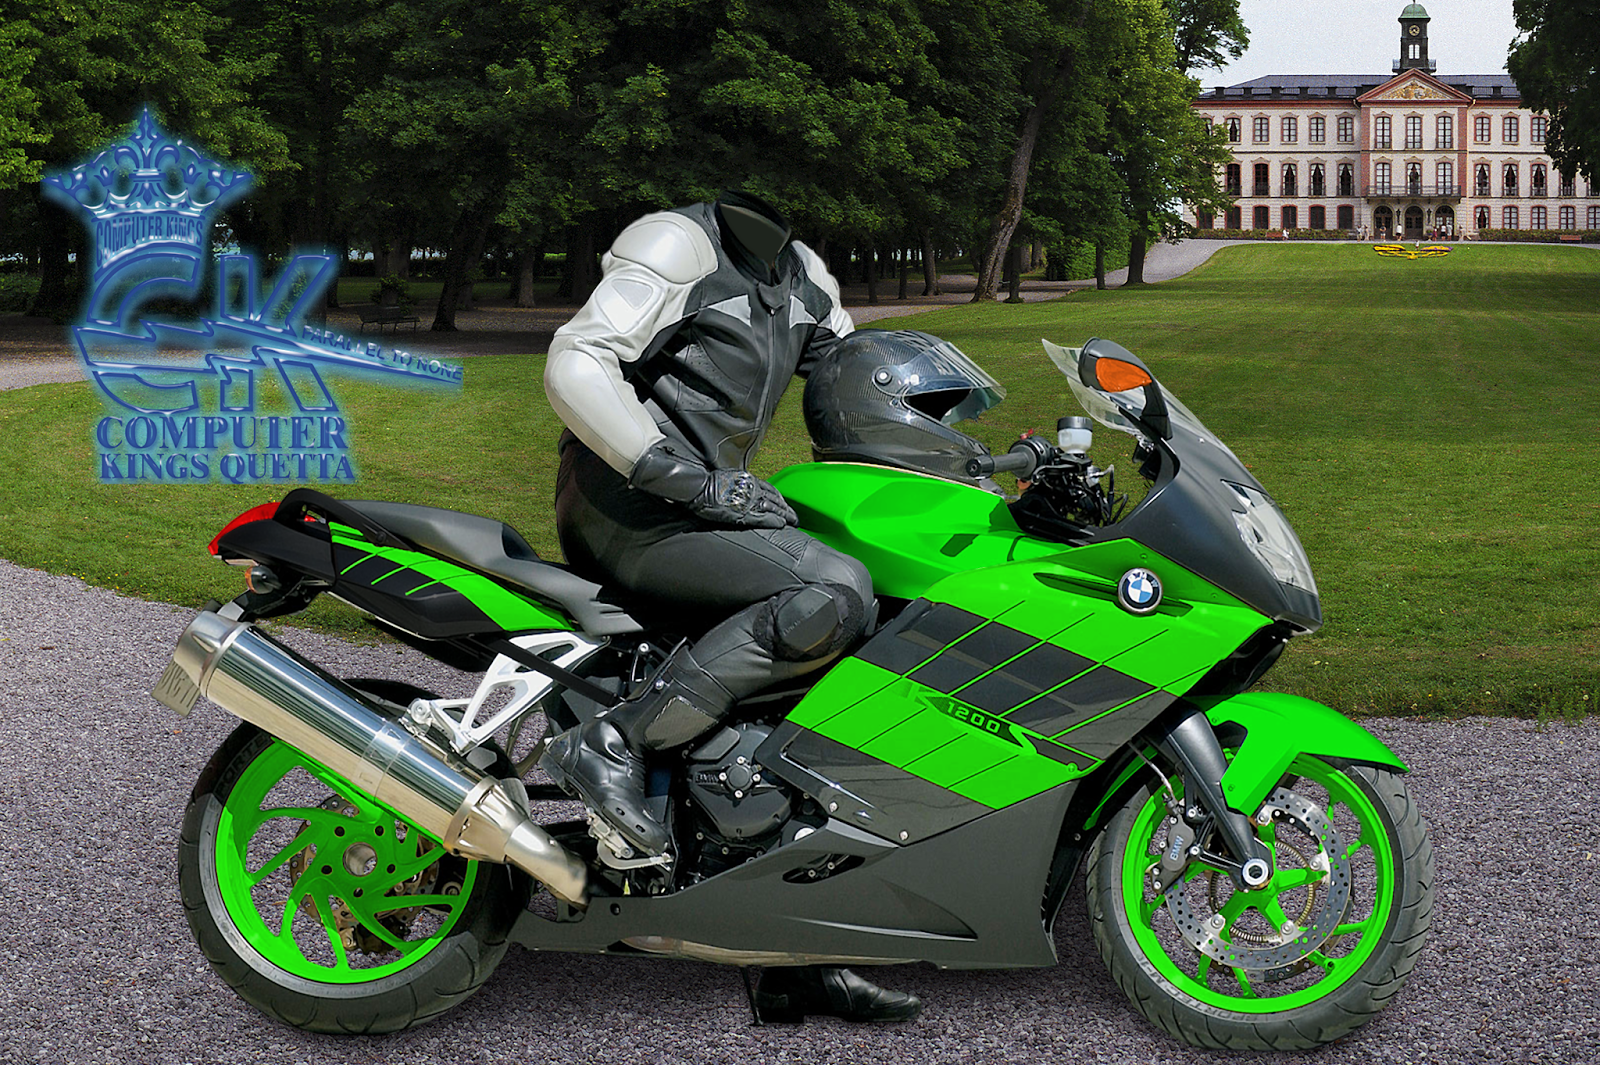 Photoshop Bike With Man Psd File Free Download ~ JK Software,s